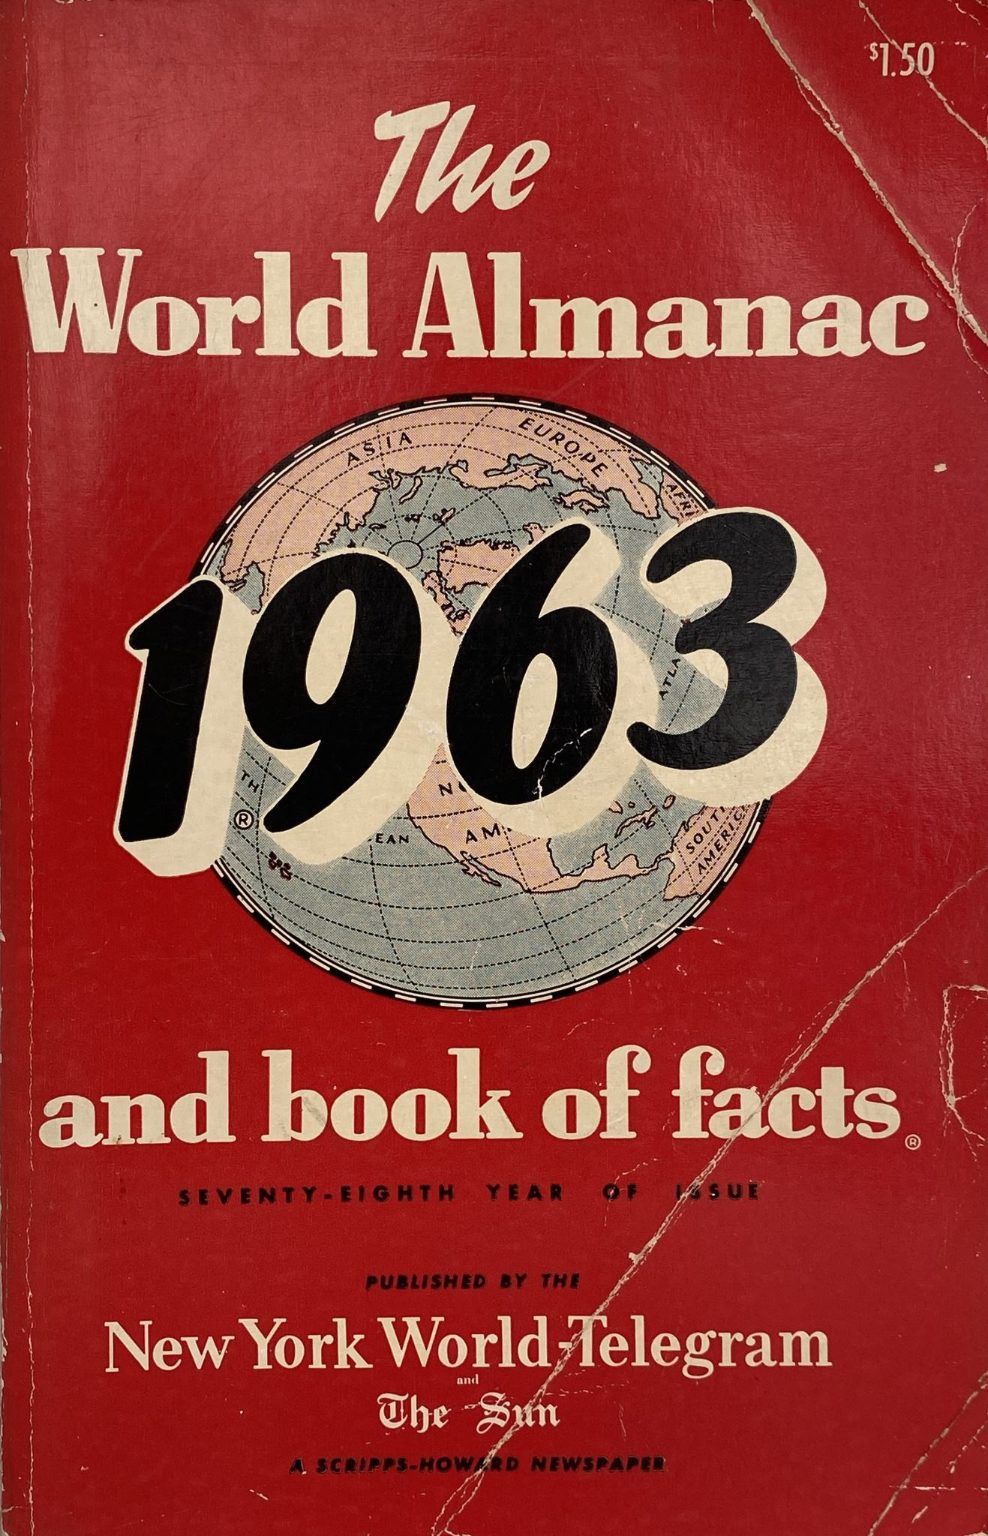 THE WORLD ALMANAC and Book of Facts 1963